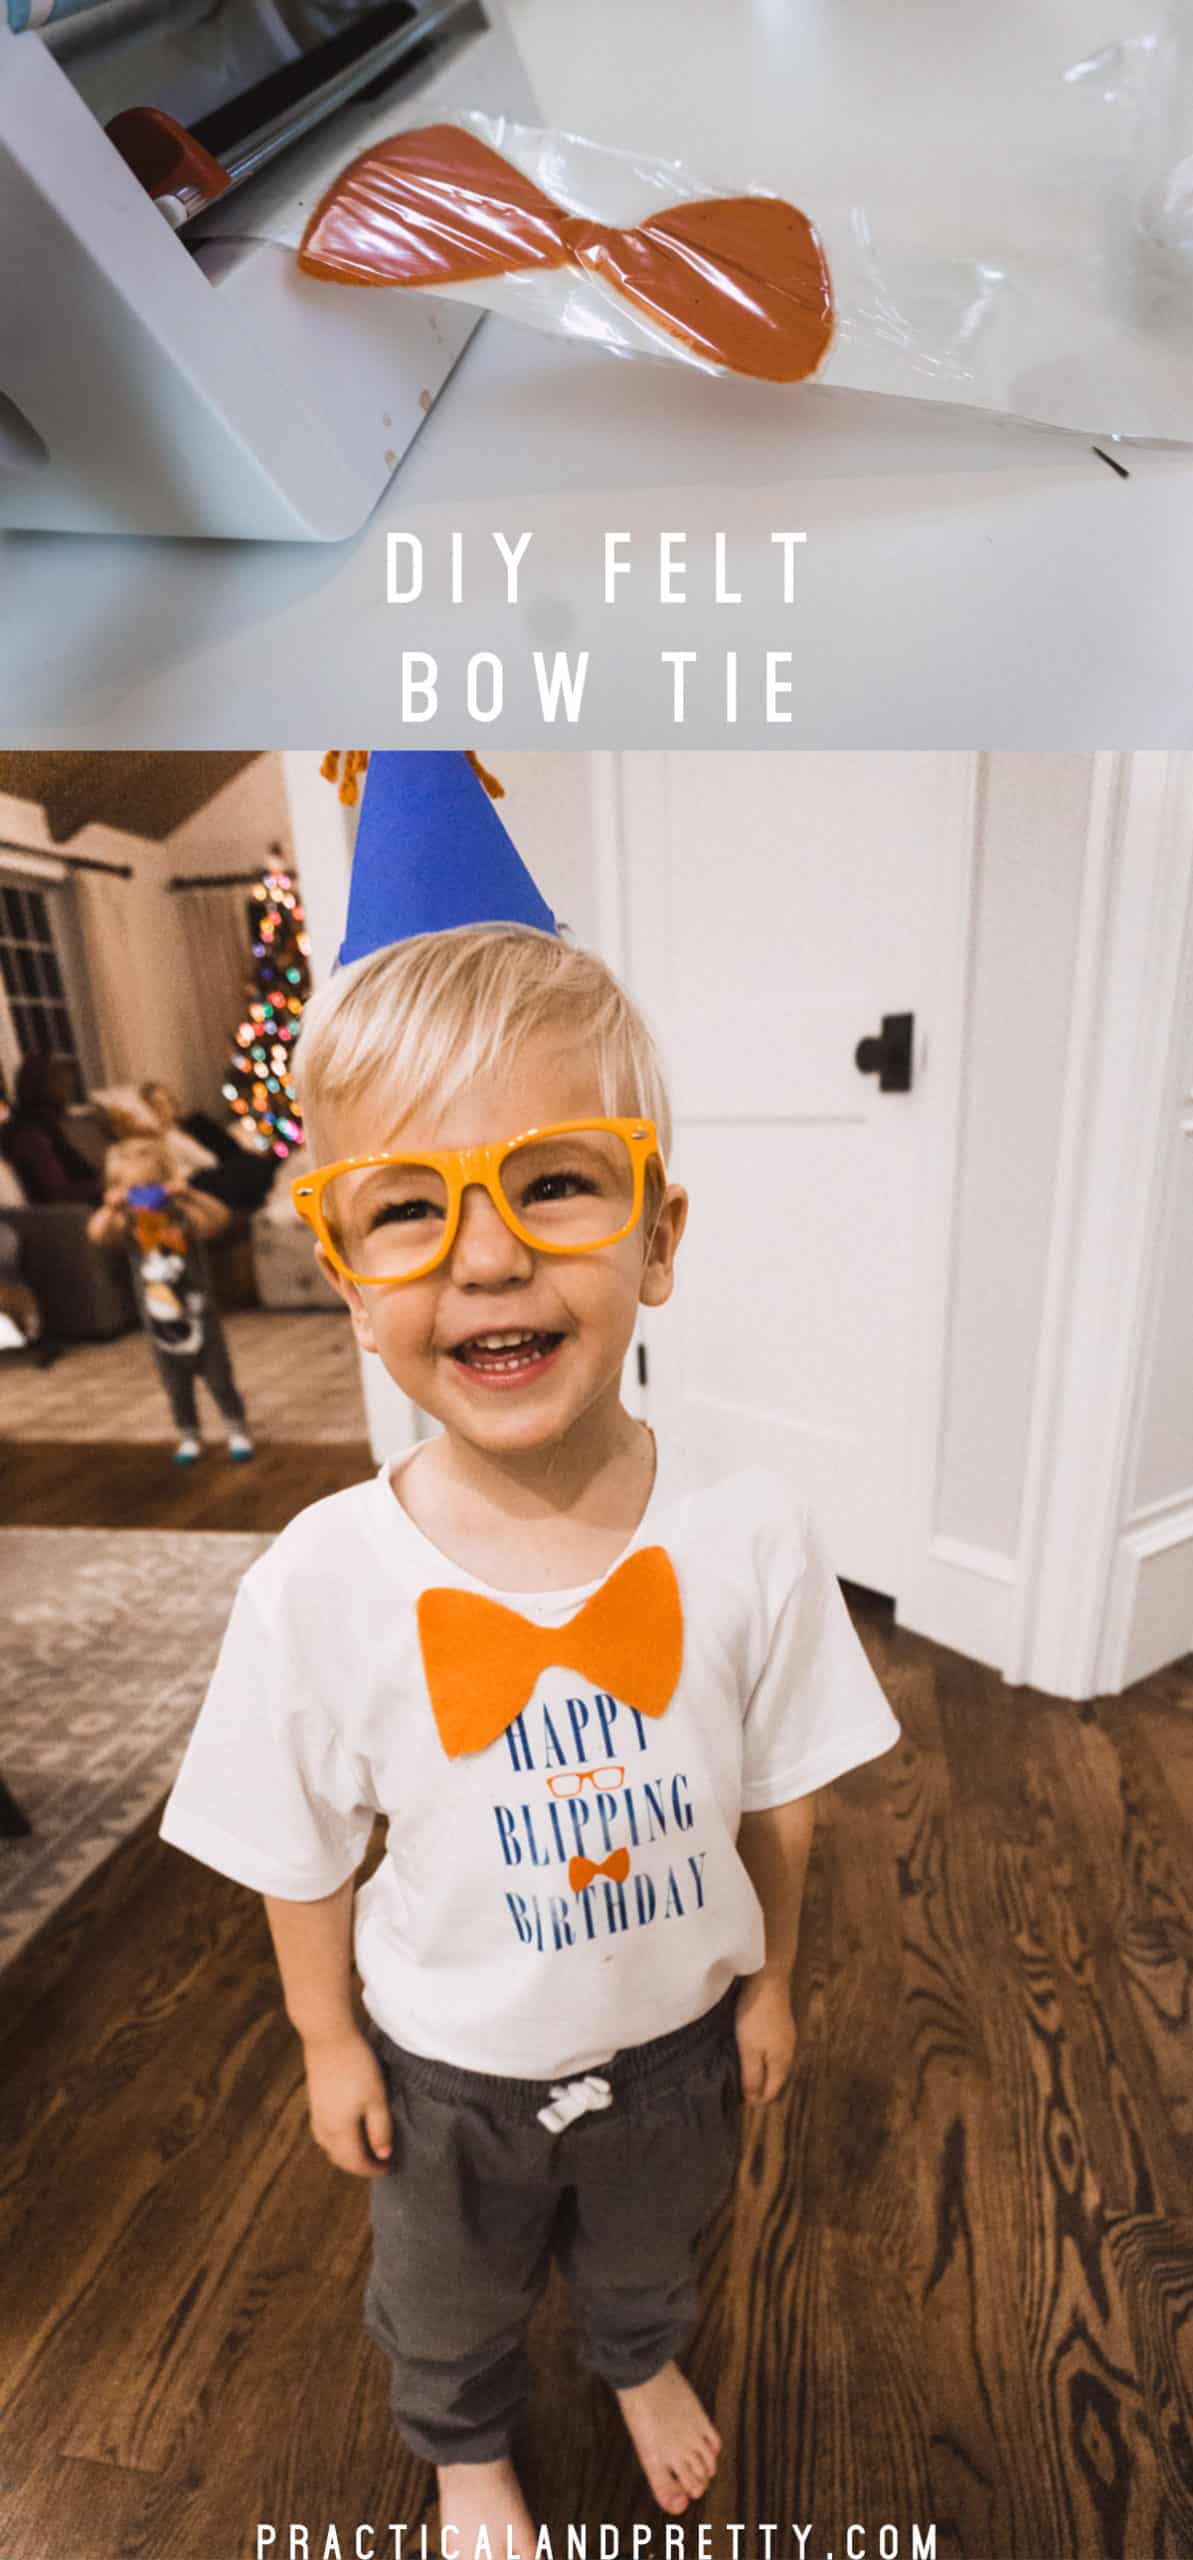 Customize this party hat to your color scheme and needs for your next fun party! I show you how I made a simple pom pom and assembled the hat.